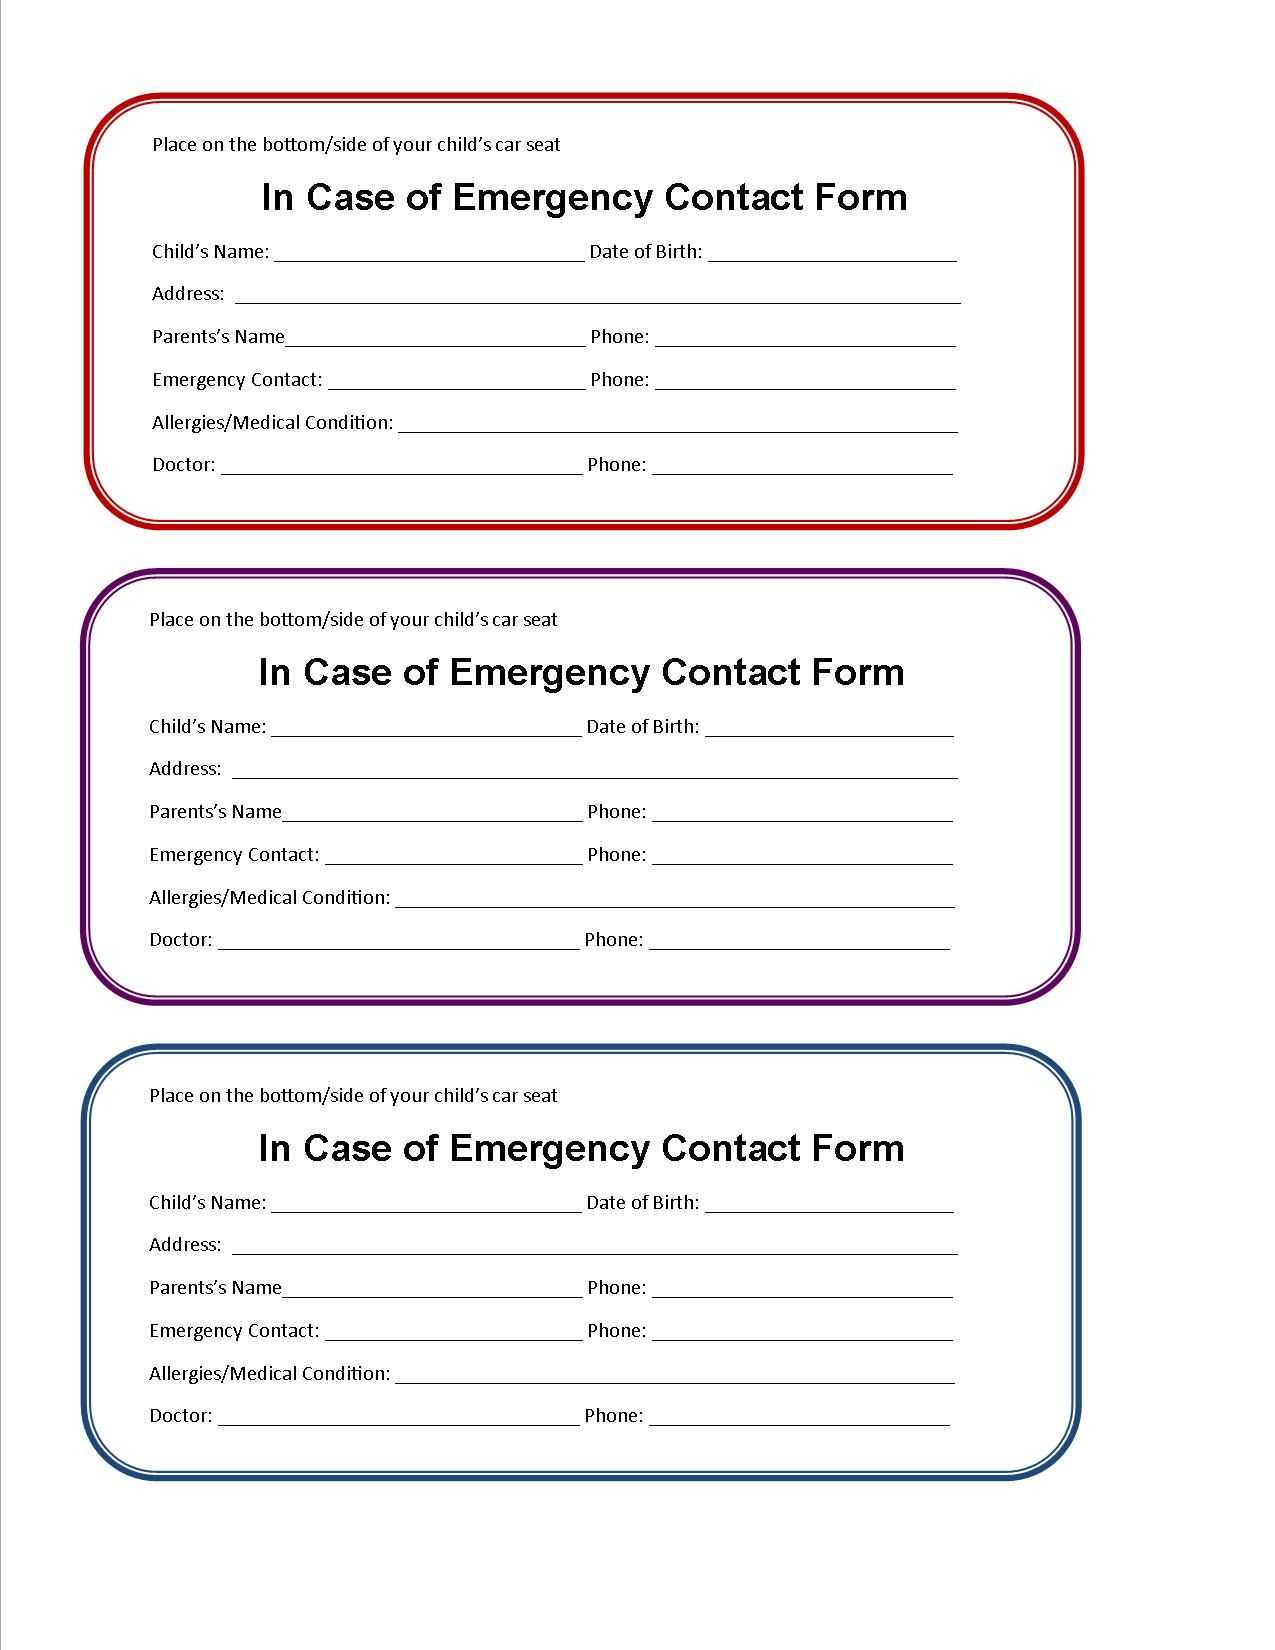 Printable Emergency Contact Form For Car Seat | Super Mom I Within In Case Of Emergency Card Template